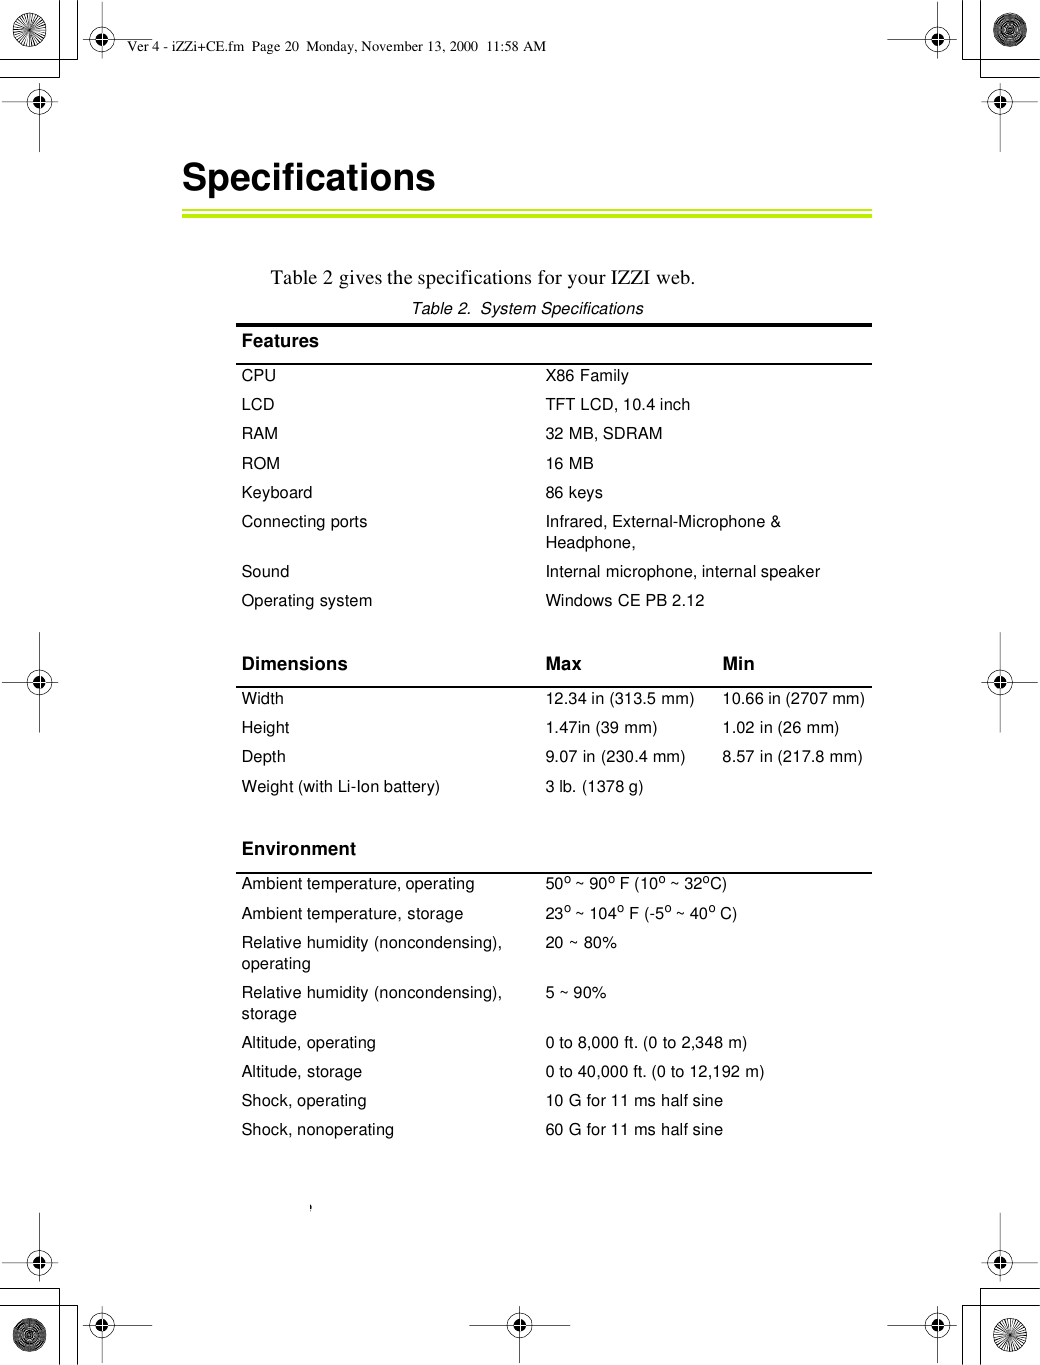 20User’s GuideSpecificationsTable 2 gives the specifications for your IZZI web.Table2.SystemSpecificationsFeaturesCPU X86 FamilyLCD TFT LCD, 10.4 inchRAM 32 MB, SDRAMROM 16 MBKeyboard 86 keysConnecting ports Infrared, External-Microphone &amp;Headphone,Sound Internal microphone, internal speakerOperating system Windows CE PB 2.12Dimensions MaxMinWidth 12.34 in (313.5 mm) 10.66 in (2707 mm)Height 1.47in (39 mm) 1.02 in (26 mm)Depth 9.07 in (230.4 mm) 8.57 in (217.8 mm)Weight (with Li-Ion battery) 3 lb. (1378 g)EnvironmentAmbient temperature, operating 50o~90oF(10o~32oC)Ambient temperature, storage 23o~104oF (-5o~40oC)Relative humidity (noncondensing),operating20 ~ 80%Relative humidity (noncondensing),storage5~90%Altitude, operating 0to8,000ft.(0to2,348m)Altitude, storage 0 to 40,000 ft. (0 to 12,192 m)Shock, operating 10 G for 11 ms half sineShock, nonoperating 60 G for 11 ms half sineVer 4 - iZZi+CE.fm Page 20 Monday, November 13, 2000 11:58 AM